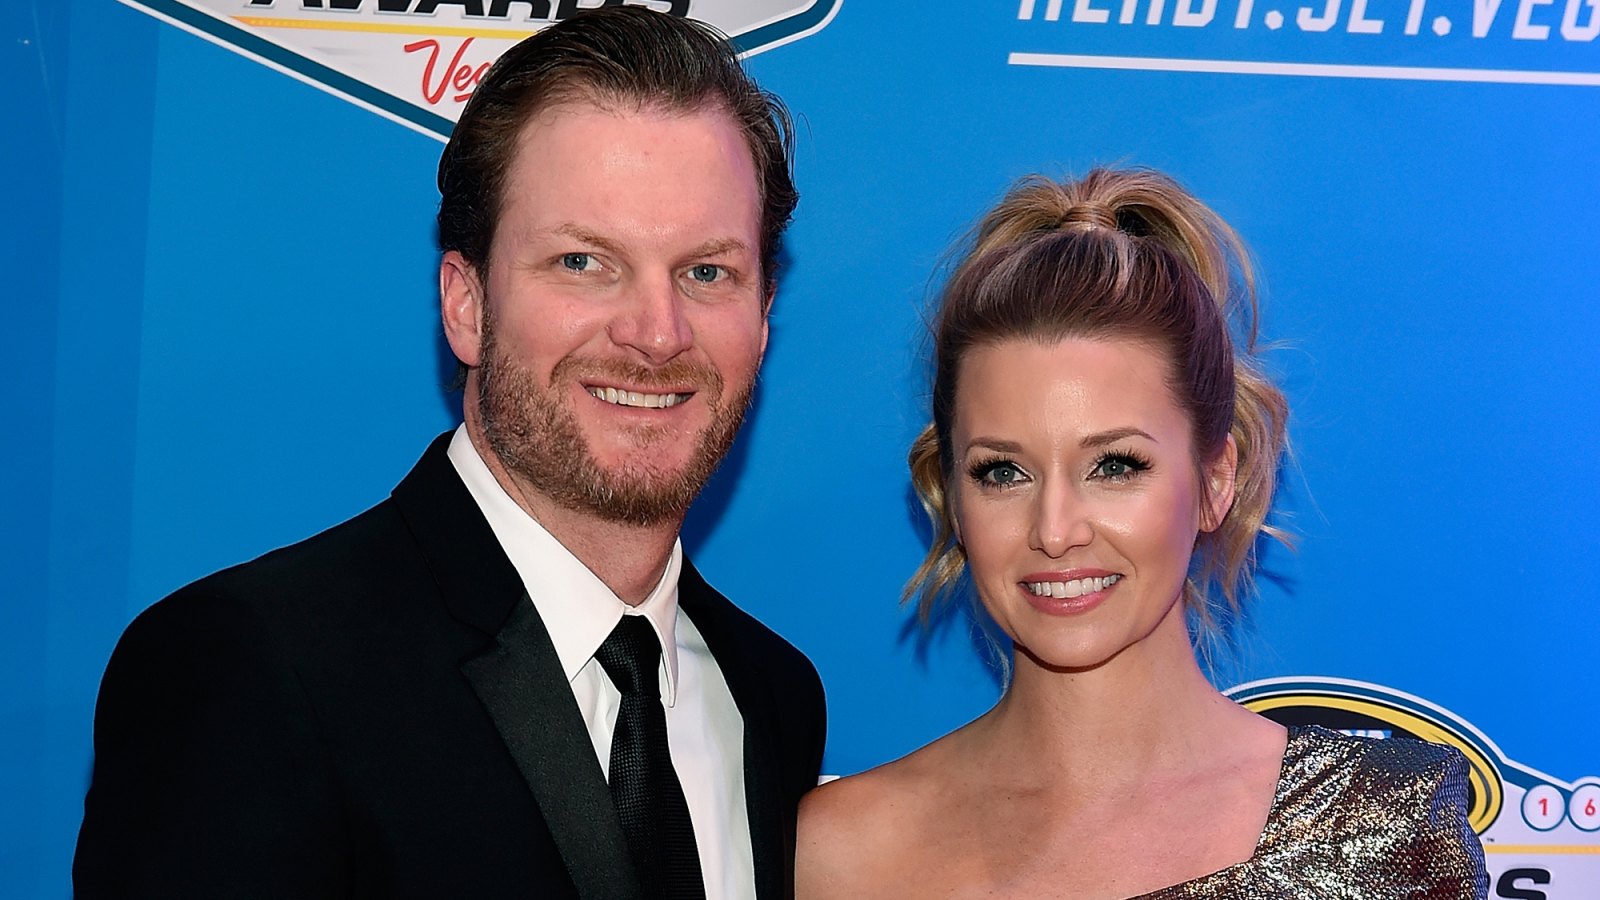 Dale Earnhardt Jr. and his wife Amy Reimann.